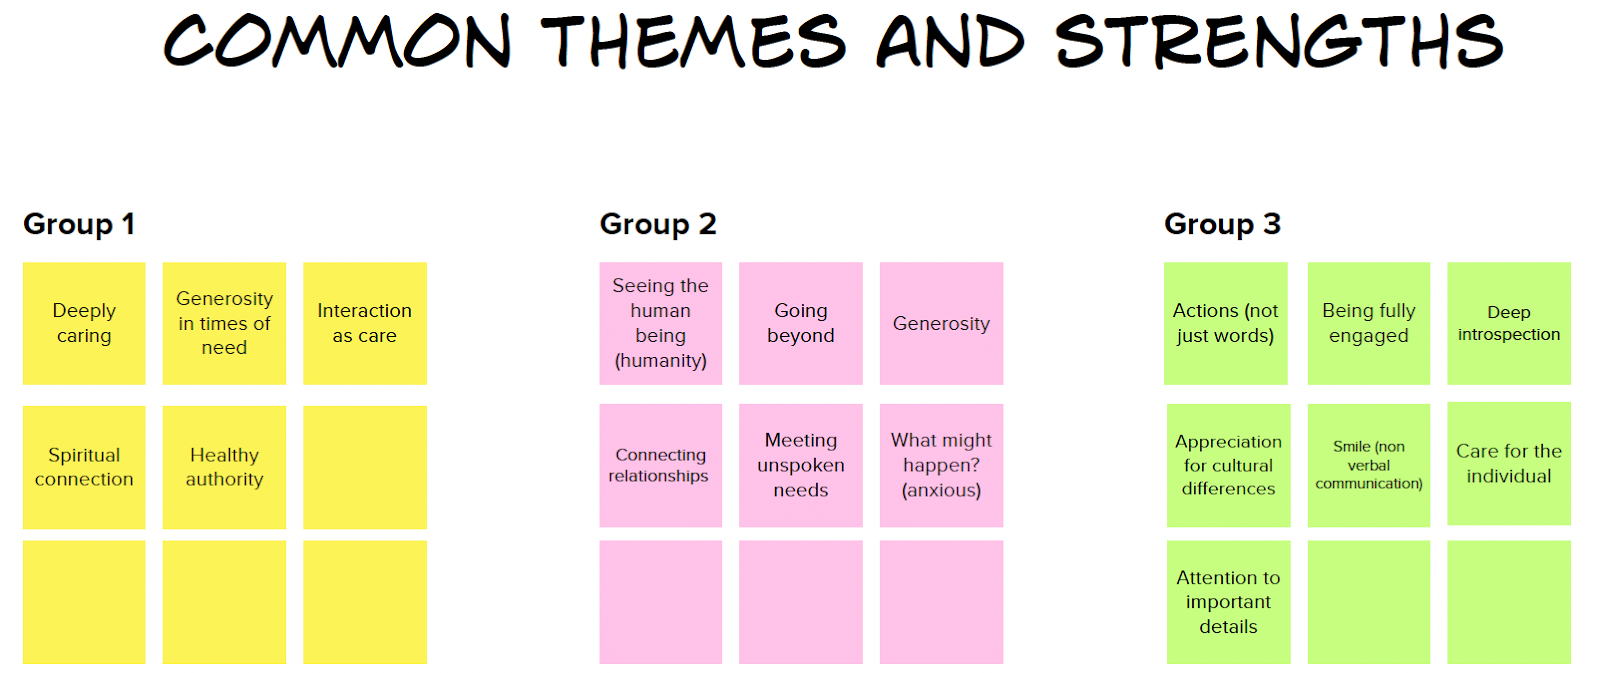 IMAGE 2 “Common Themes and Strengths”